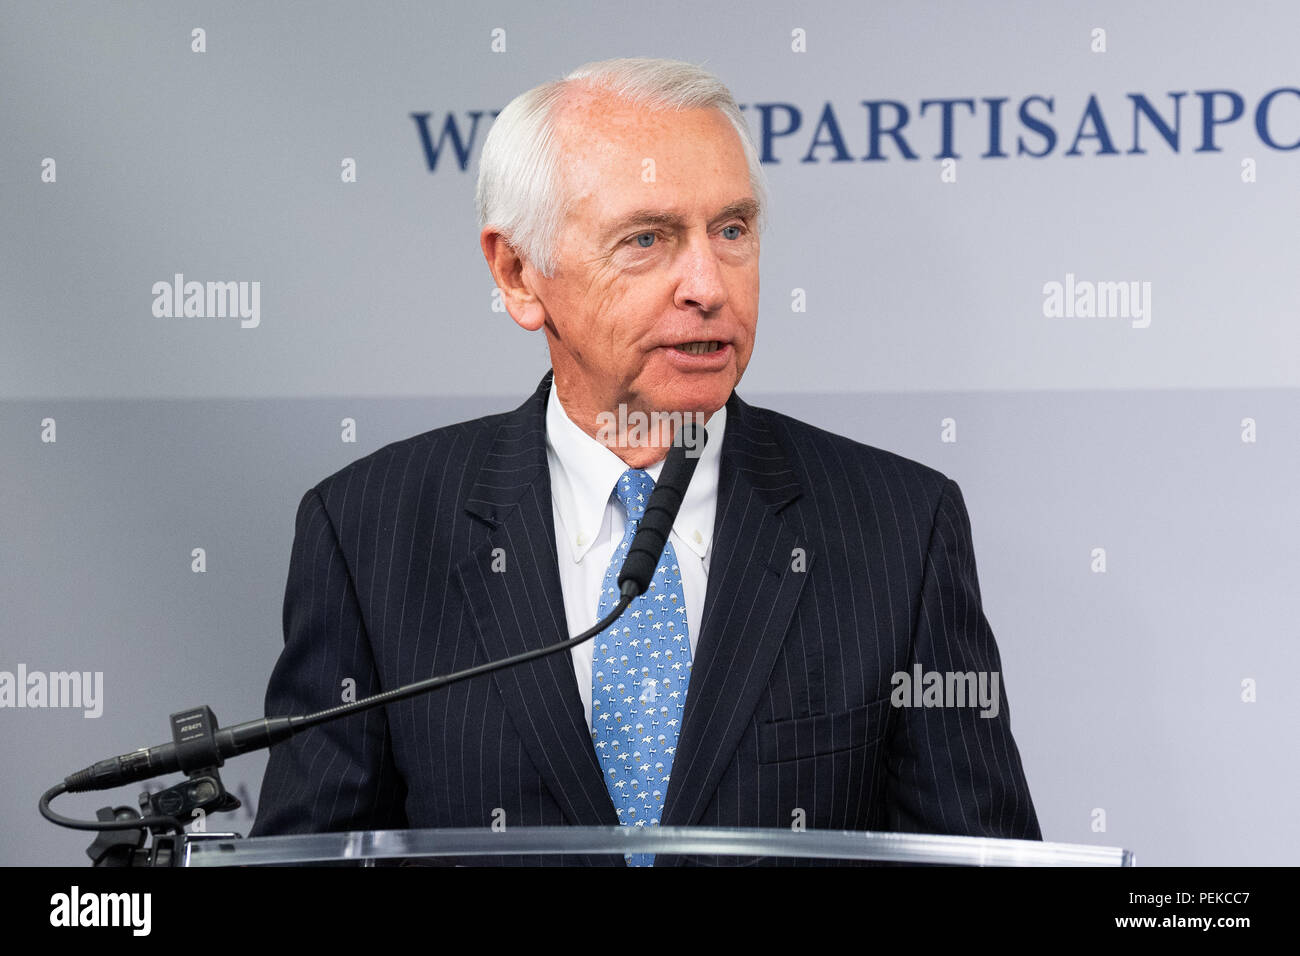 Former Kentucky Governor Steve Beshear speaking at the Restoring Our Democracy program at the Bipartisan Policy Center in Washington, DC on April 17,  Stock Photo